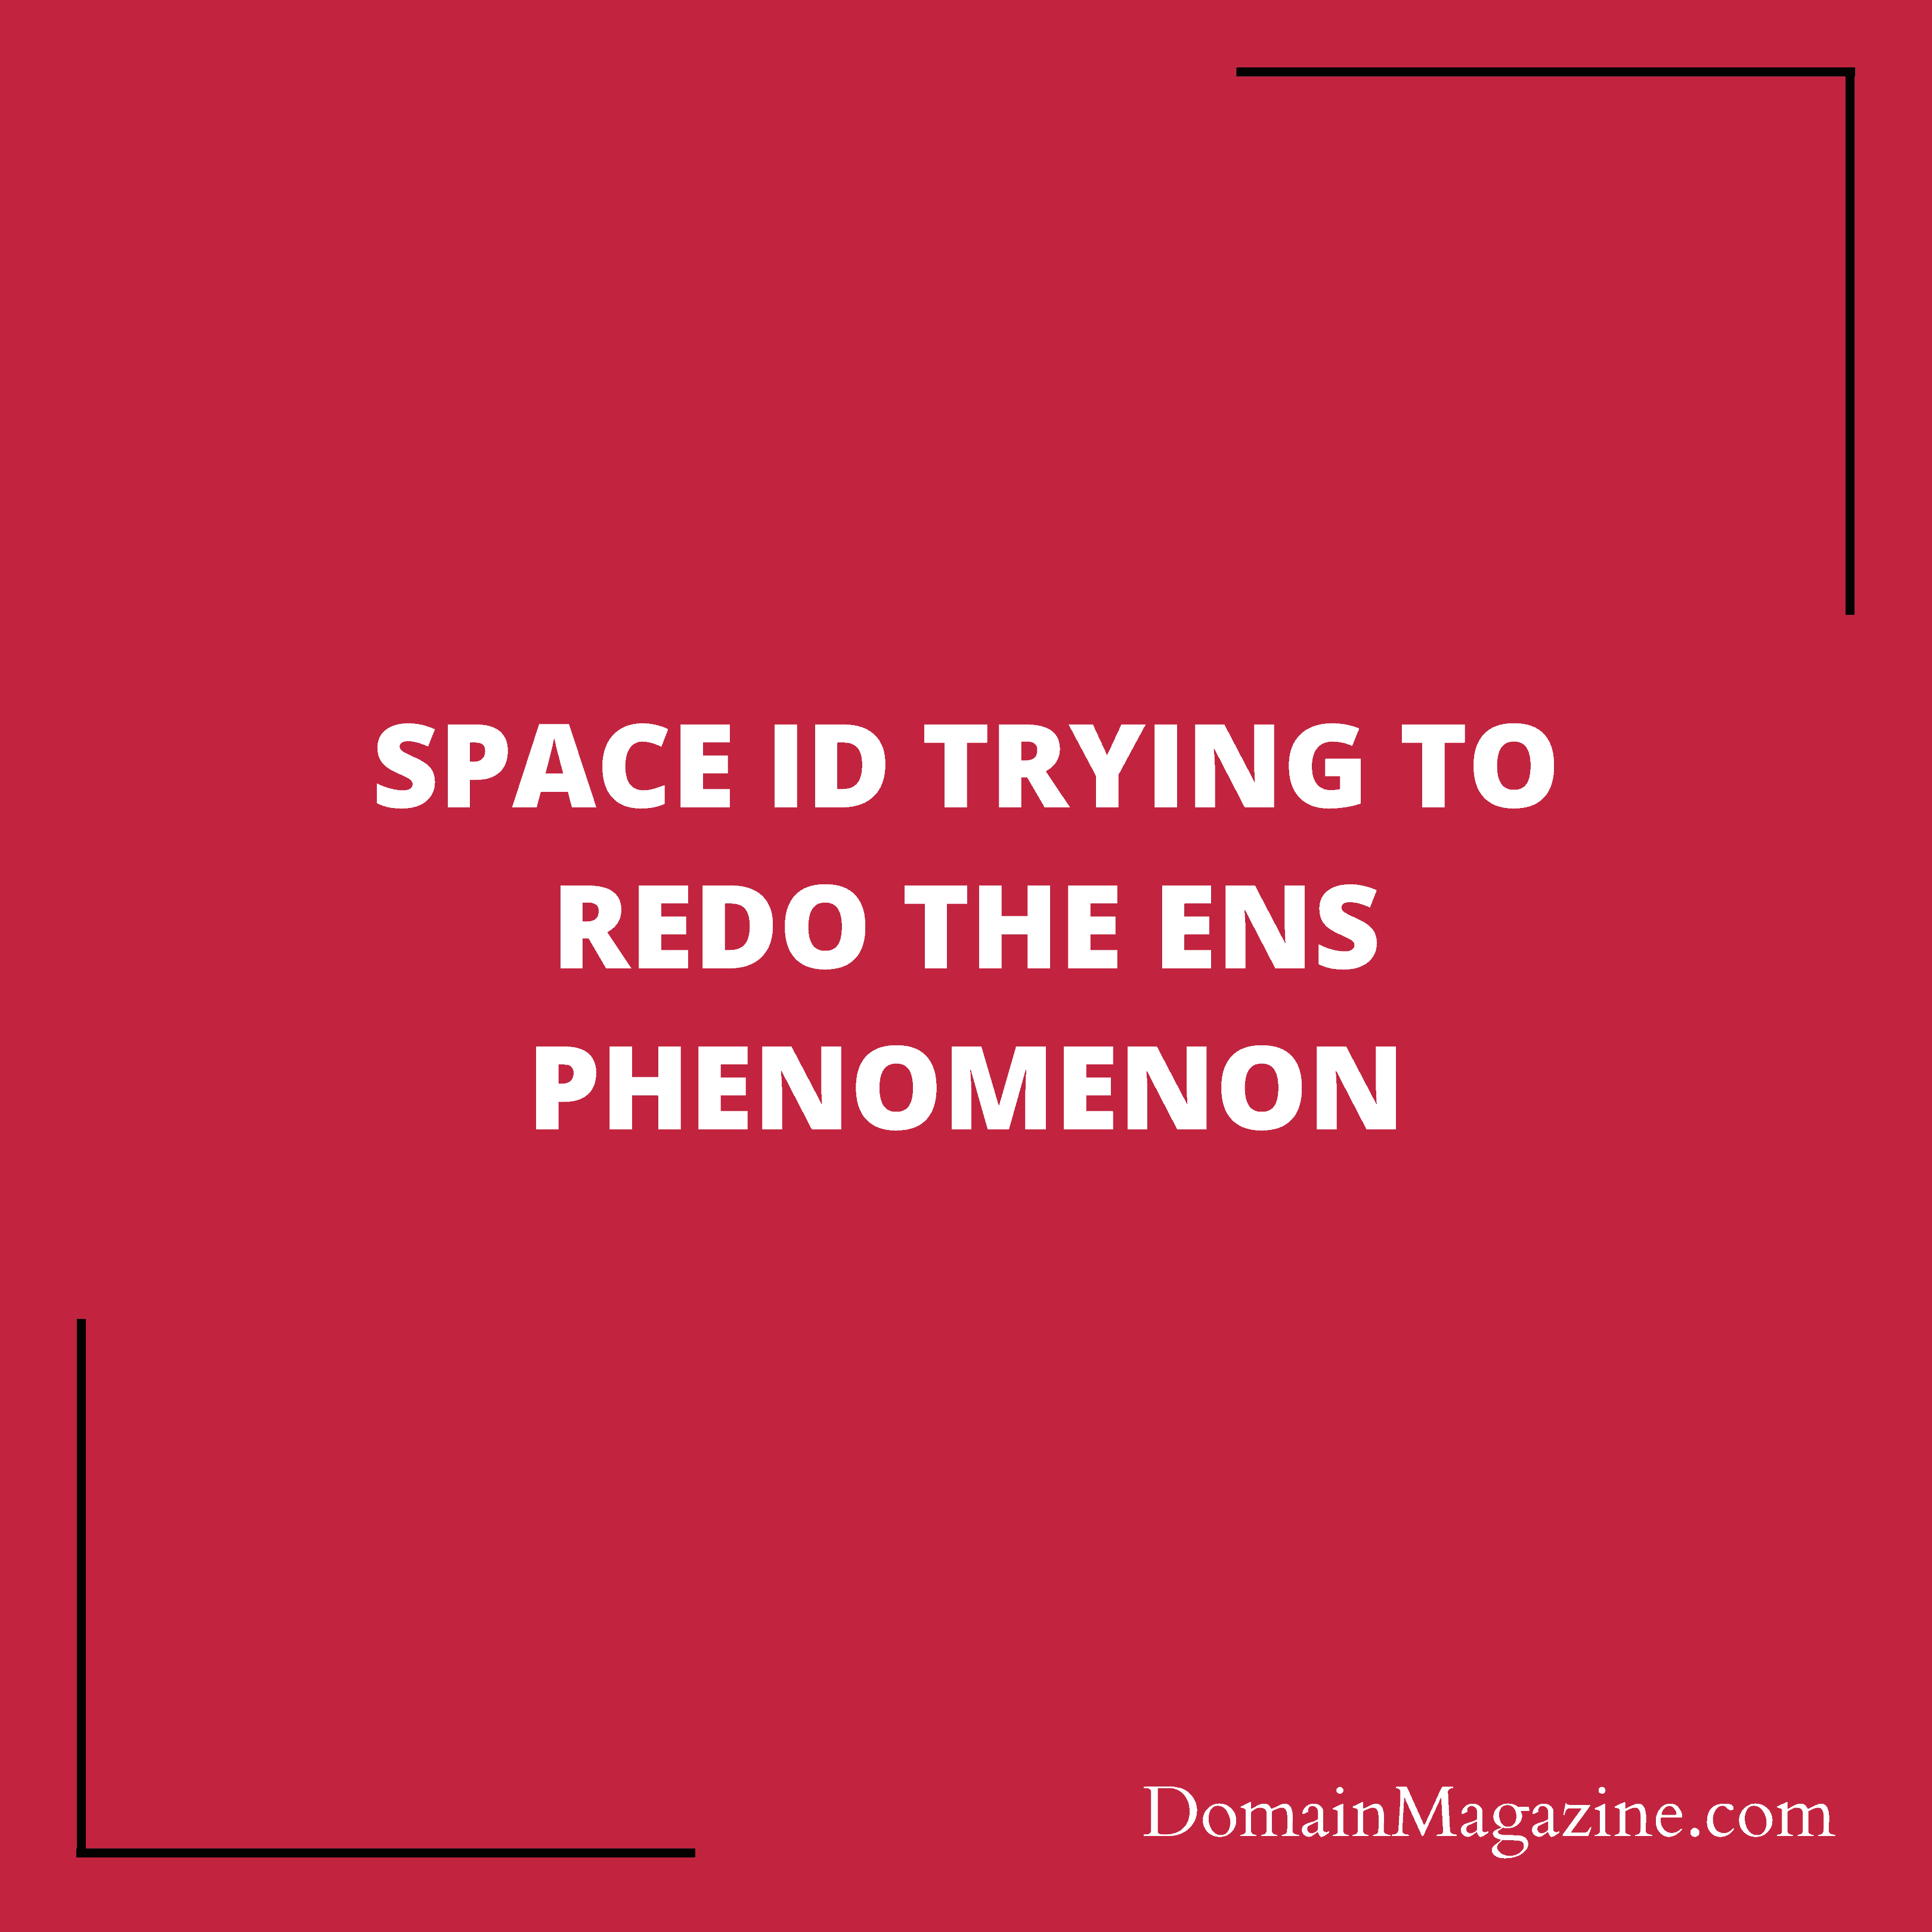 Space Id trying to redo the ENS phenomenon